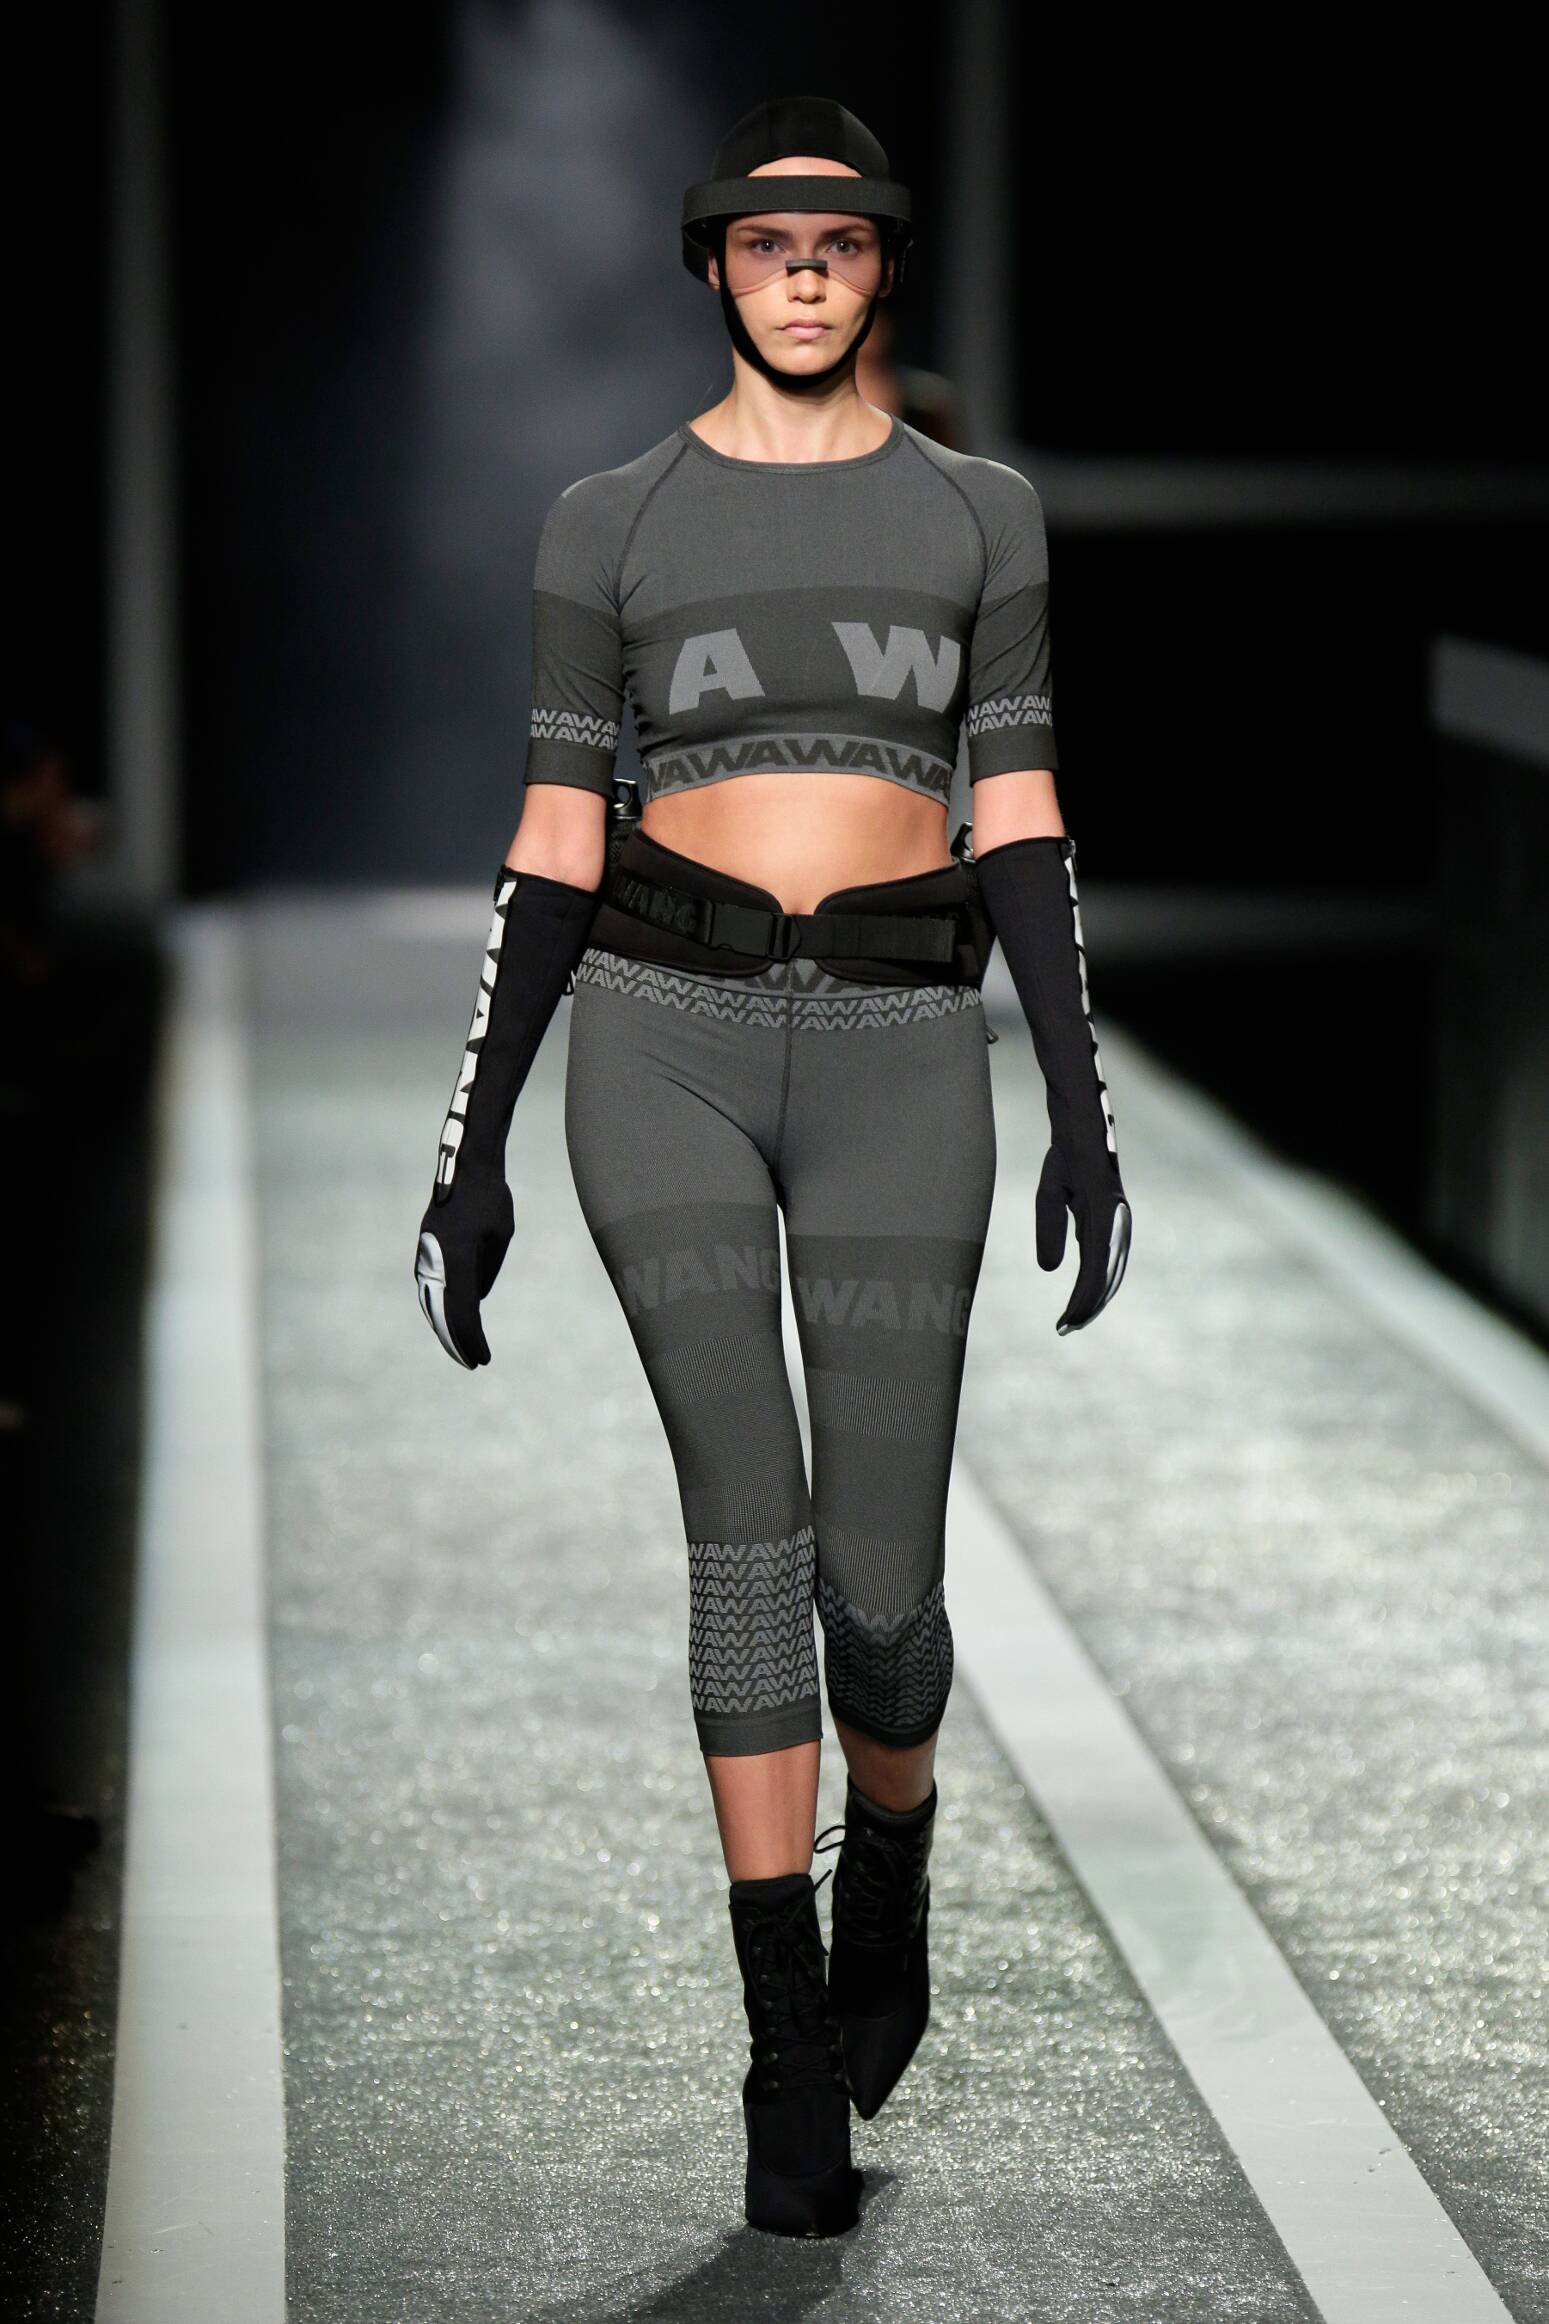 ALEXANDER WANG FOR H&M COLLECTION FASHION SHOW